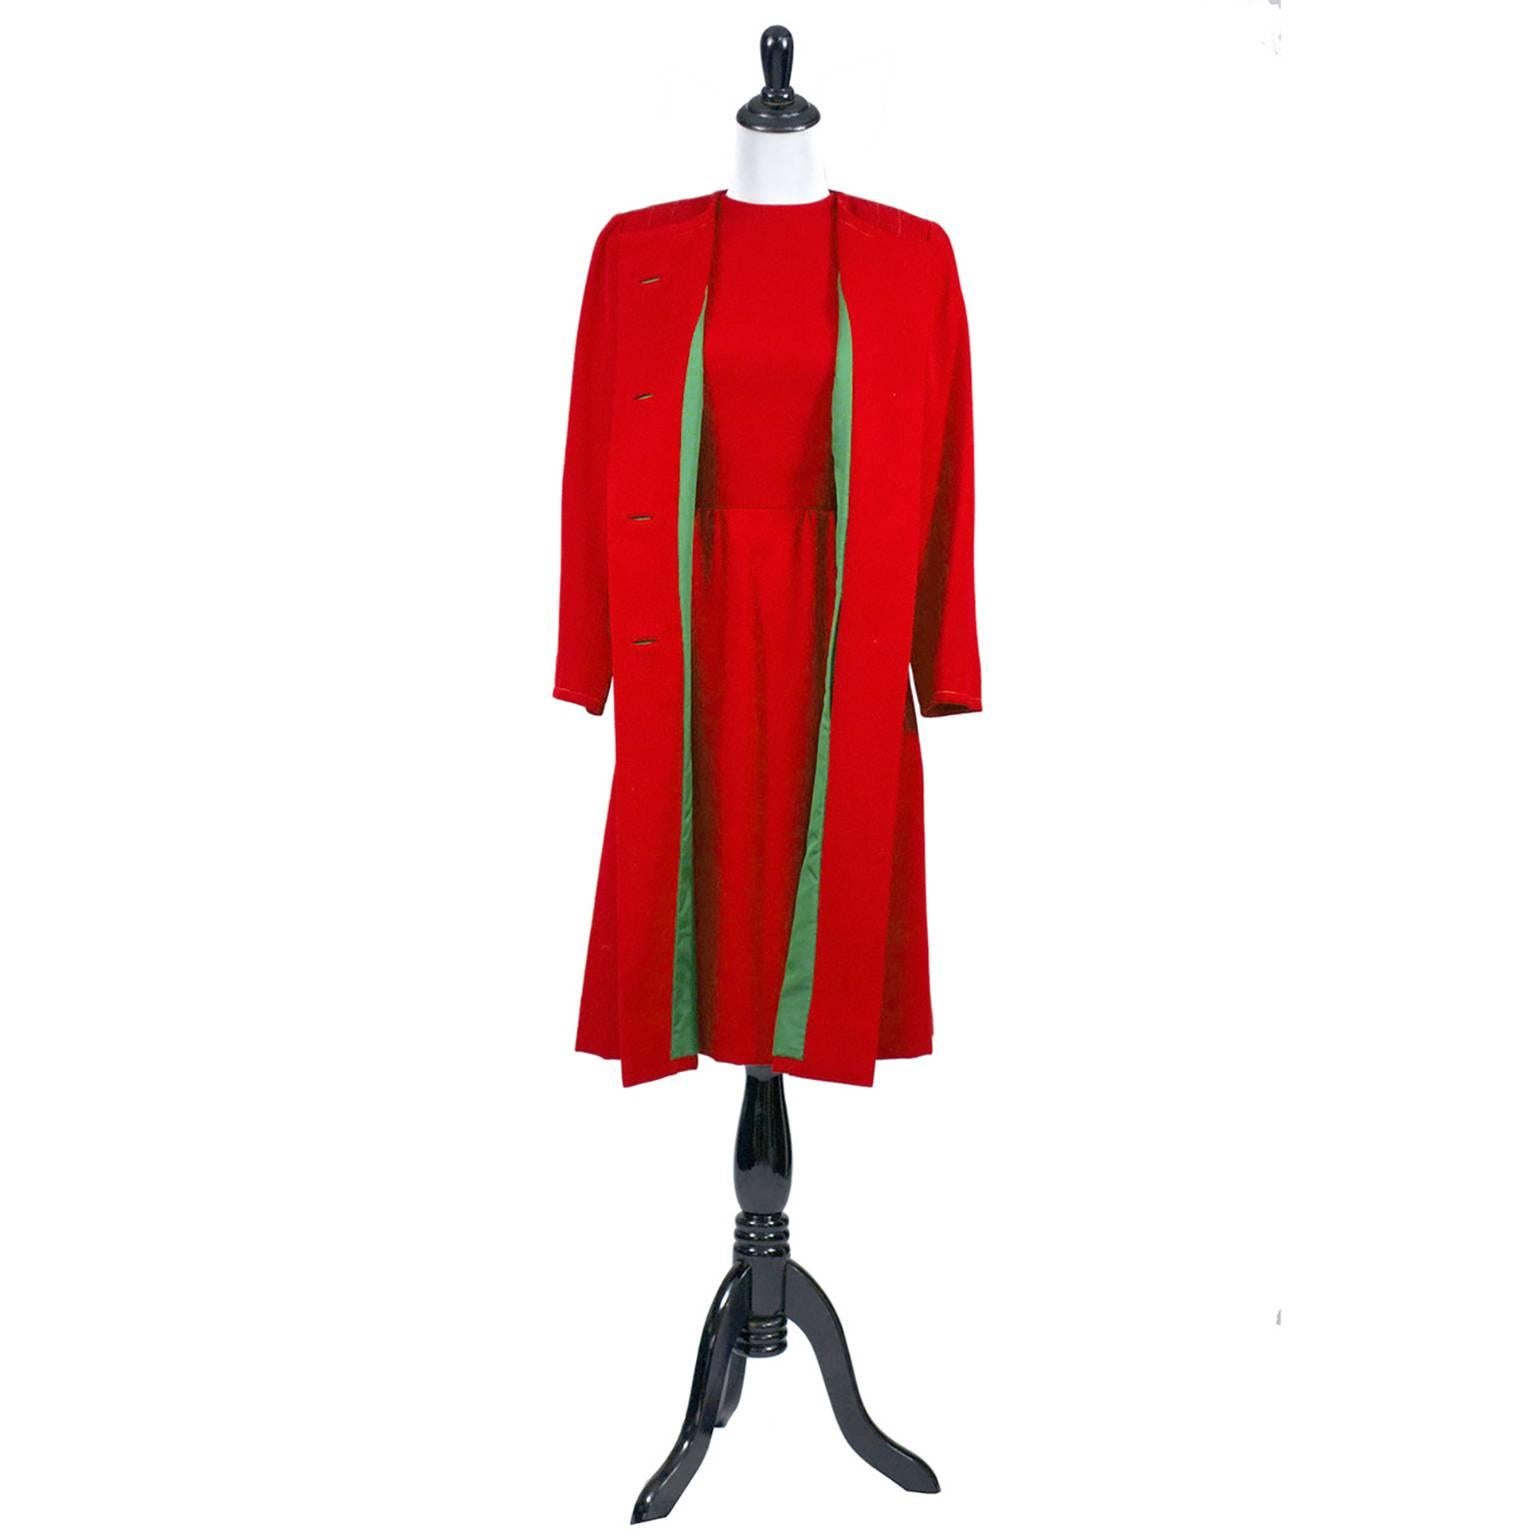 Women's 1950s Vintage Sheath Dress And Coat Suit Red Green Christmas Holiday Ensemble